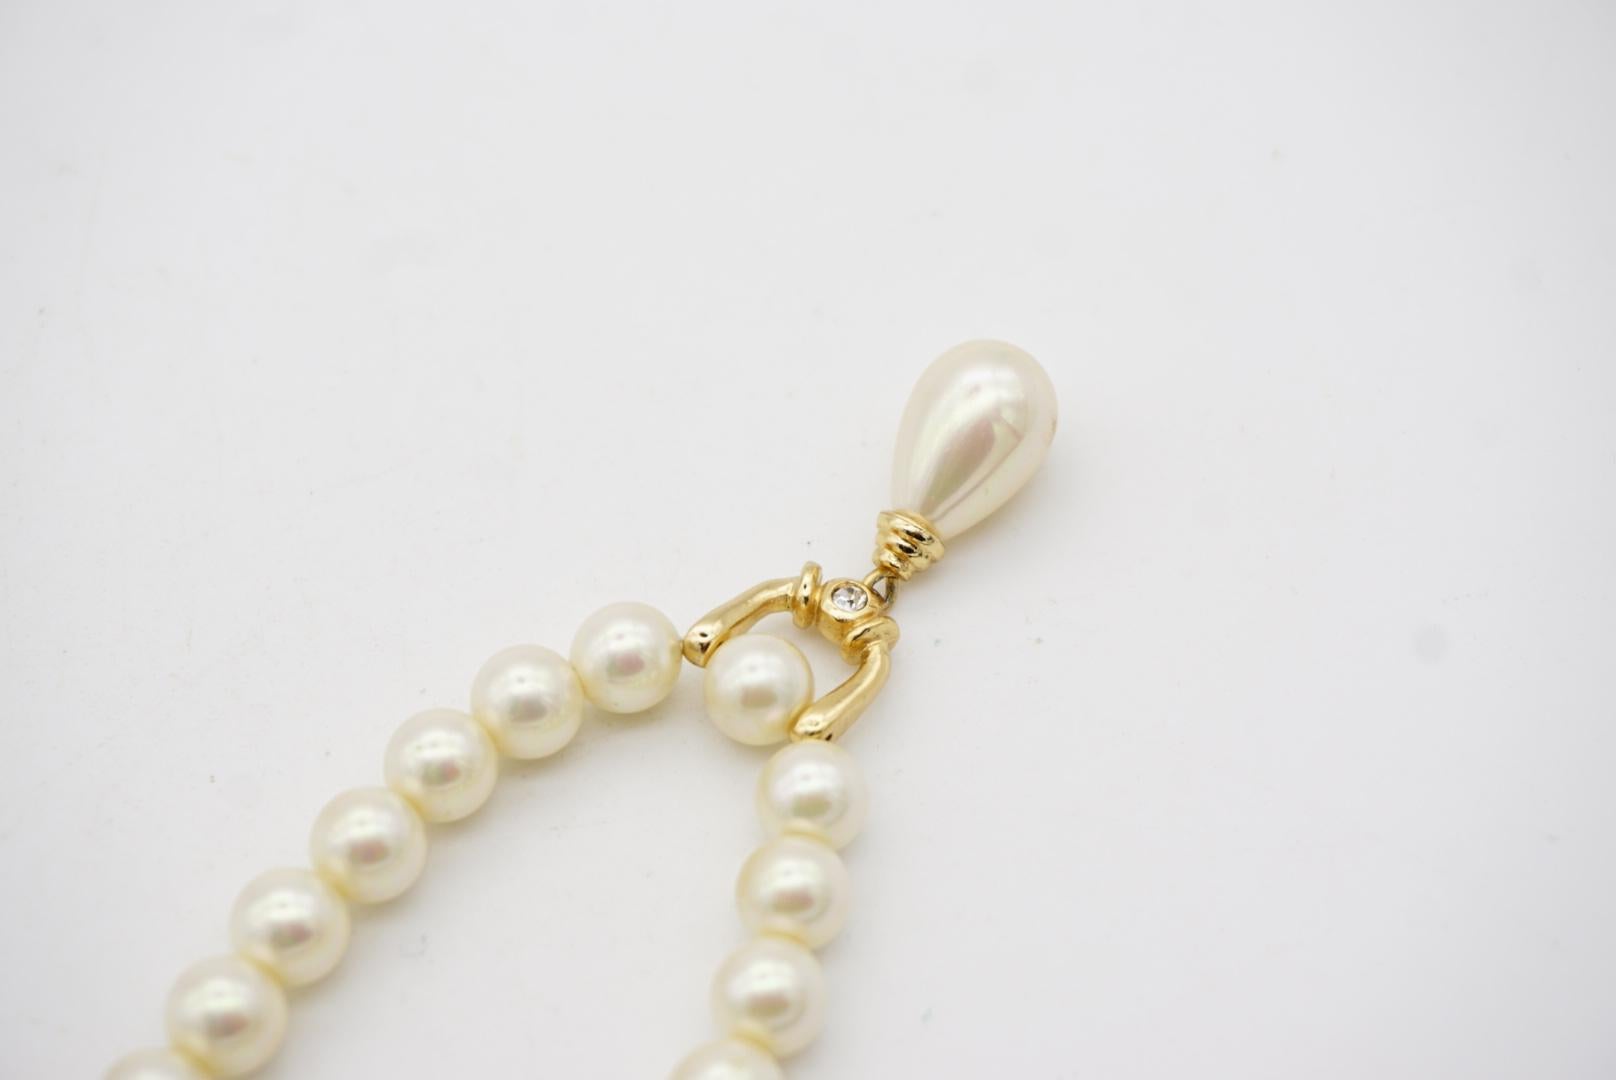 Christian Dior GROSSE 1960s White Pearls Water Drop Pendant Crystals Necklace For Sale 6